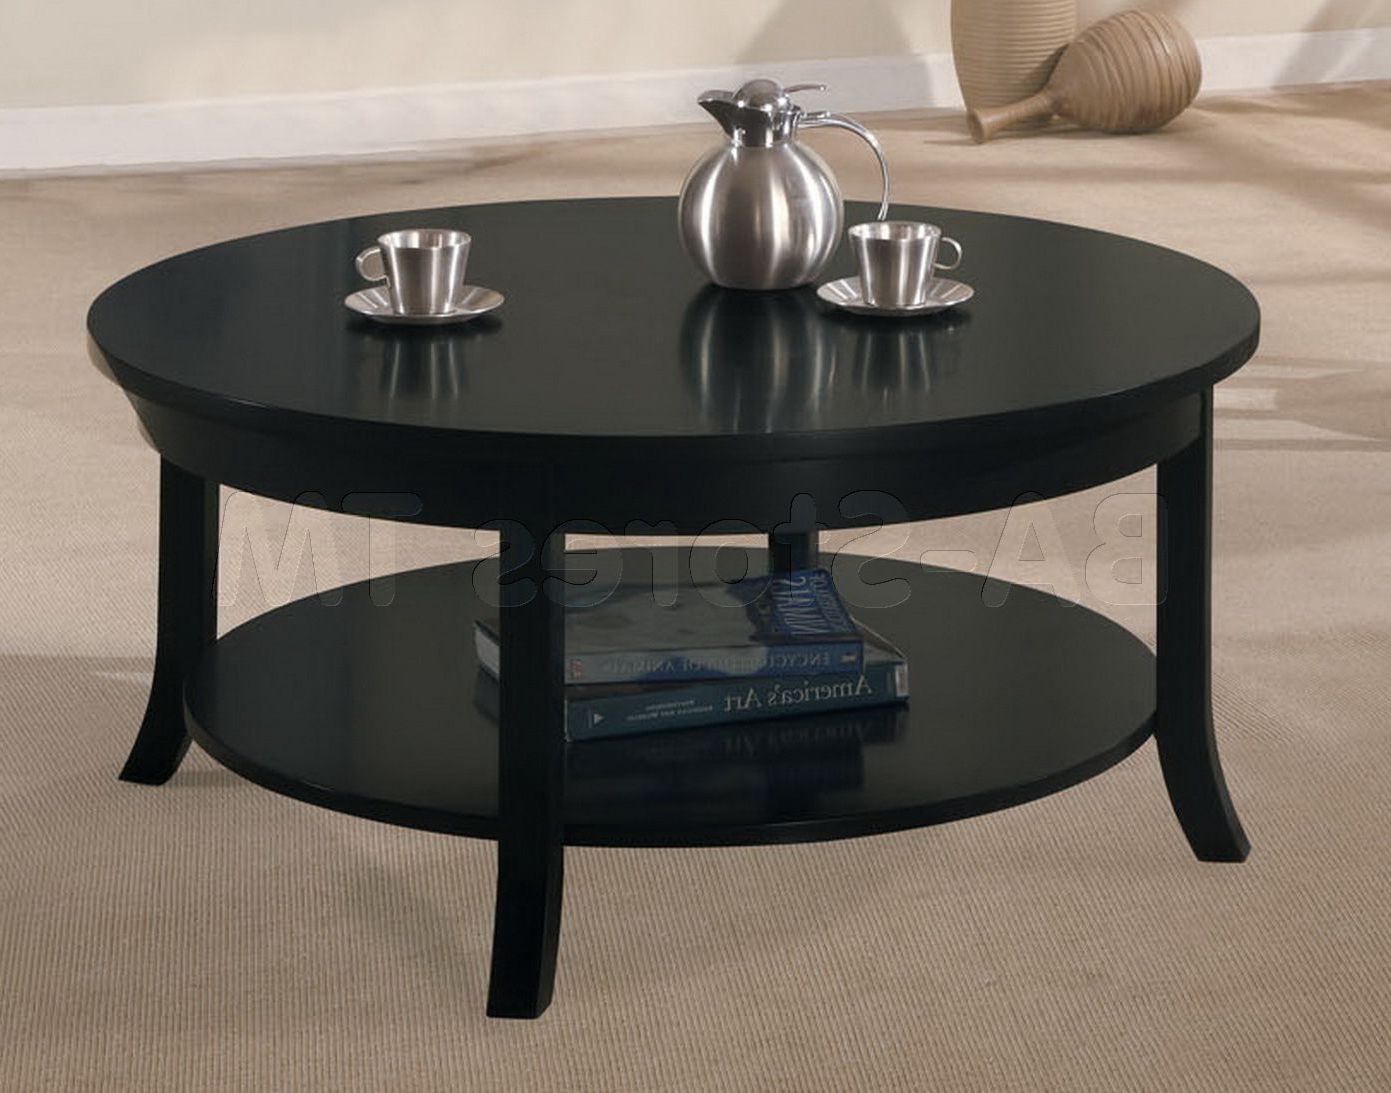 Bring A Touch Of Elegance To Your Home With A Black Circle Coffee Table Regarding Full Black Round Coffee Tables (View 4 of 20)